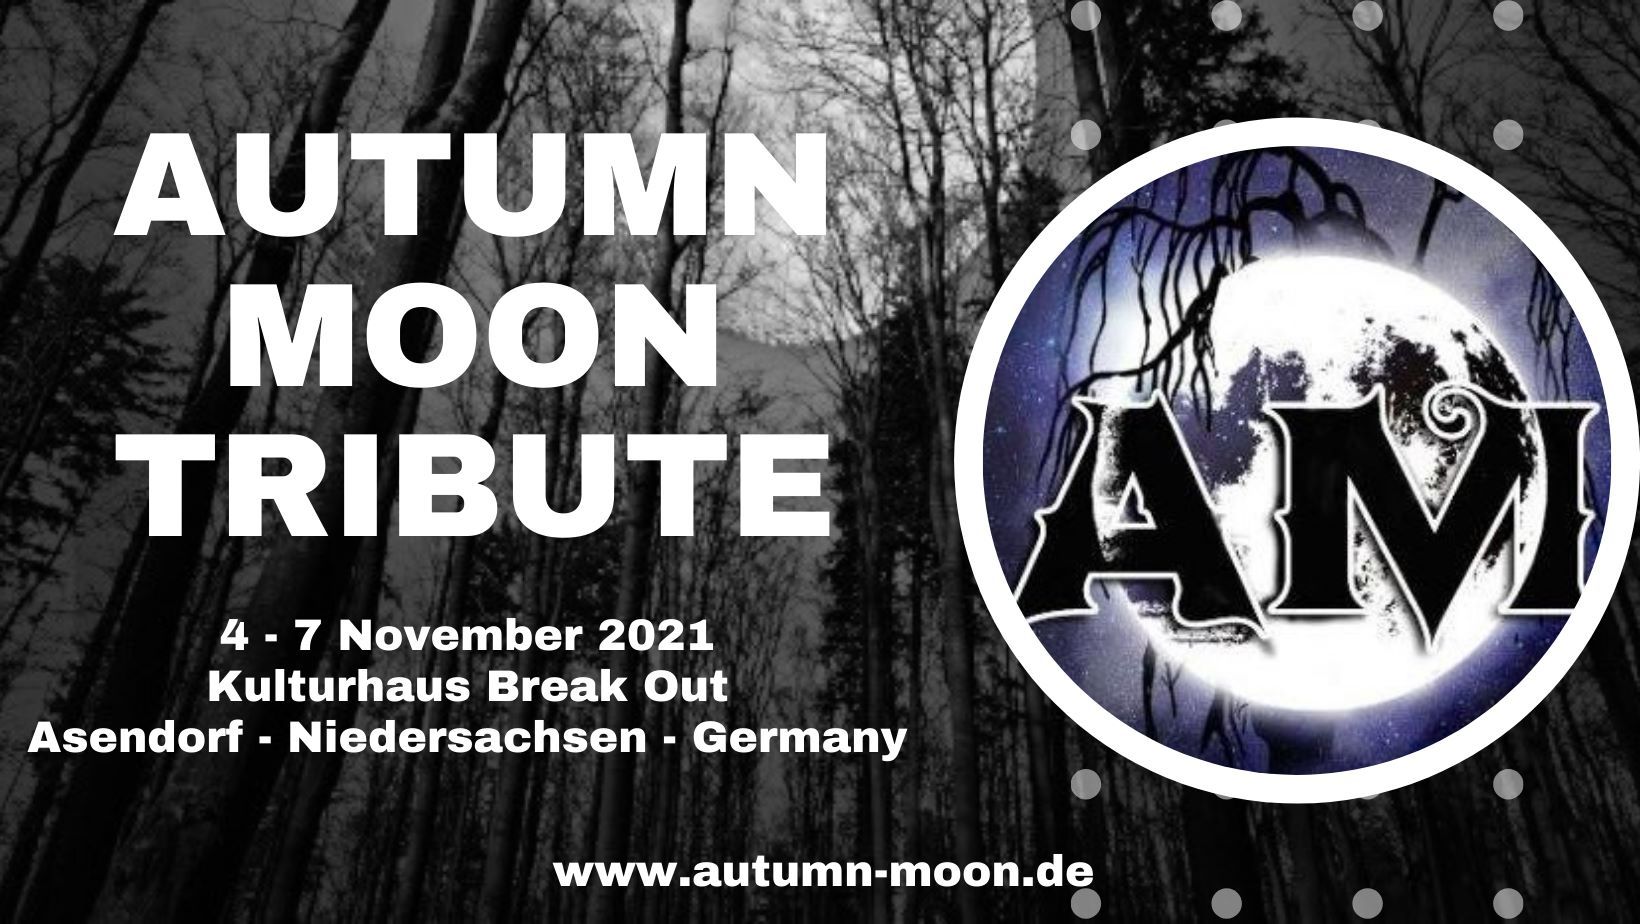 Asendorf’s next big festival: the AUTUMN MOON TRIBUTE 4th to 7th of November 2021